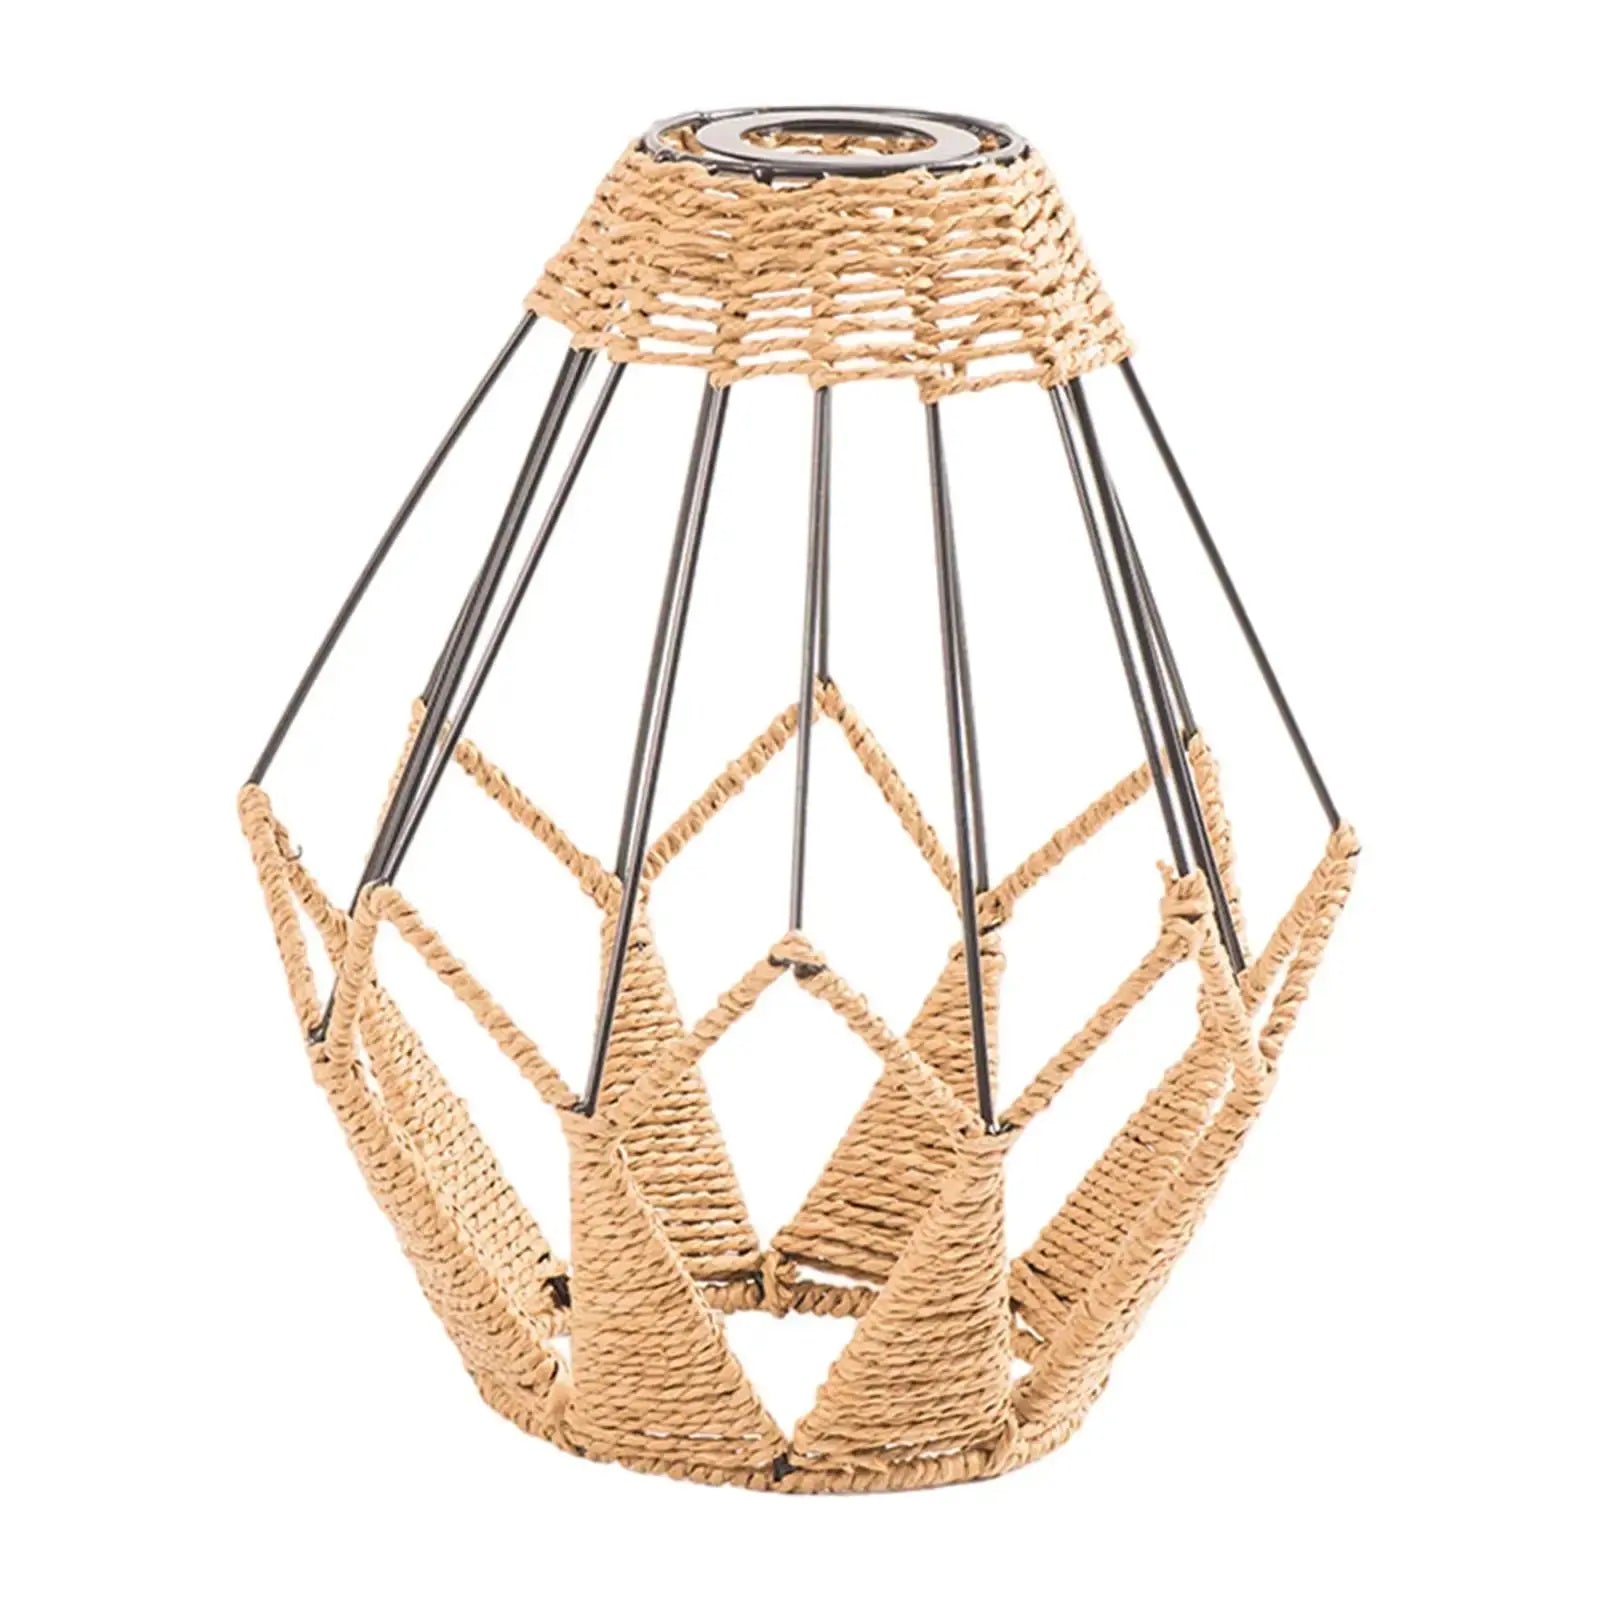 Rope Woven Lampshade Light Fixture Decoration Handmade Ceiling Lantern Cover for Restaurant Teahouse Dining Room Hotel Farmhouse ShadesArray